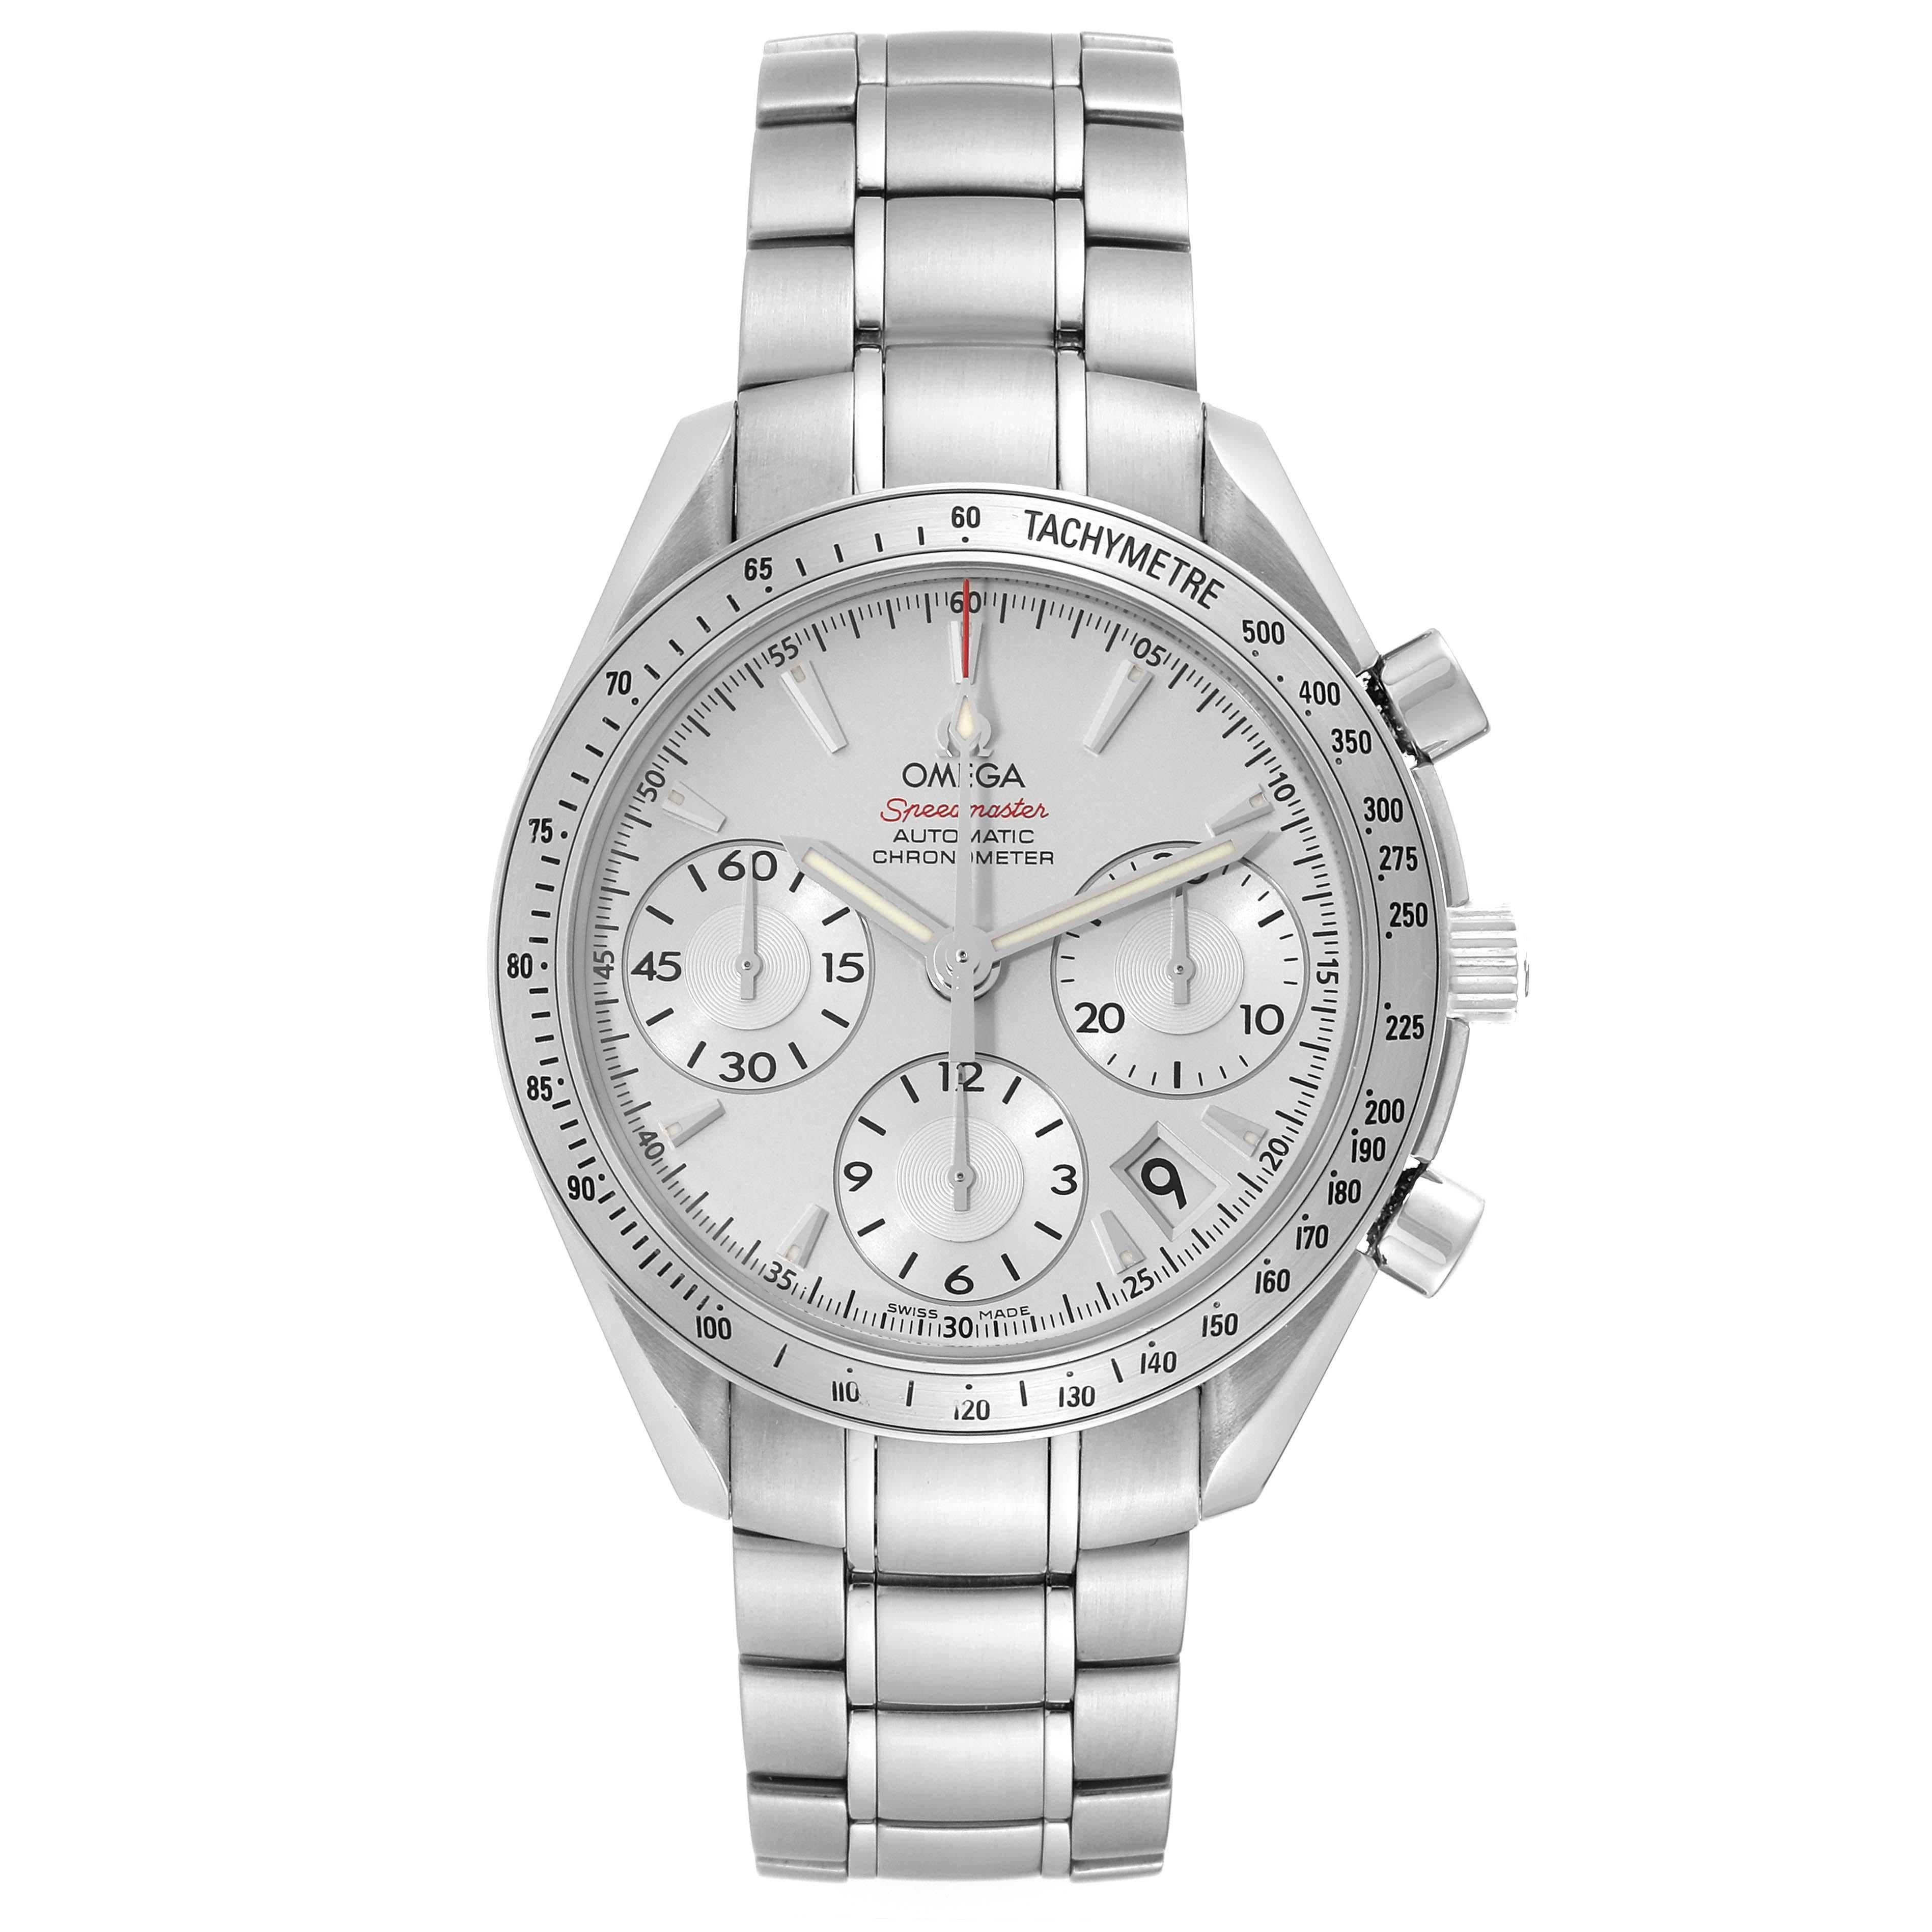 Omega Speedmaster Date Silver Dial Steel Mens Watch 323.10.40.40.02.001 Box Card. Automatic self-winding chronograph movement. Officially certified chronometer. Stainless steel round case 40.0 mm in diameter. Stainless steel bezel with tachymeter